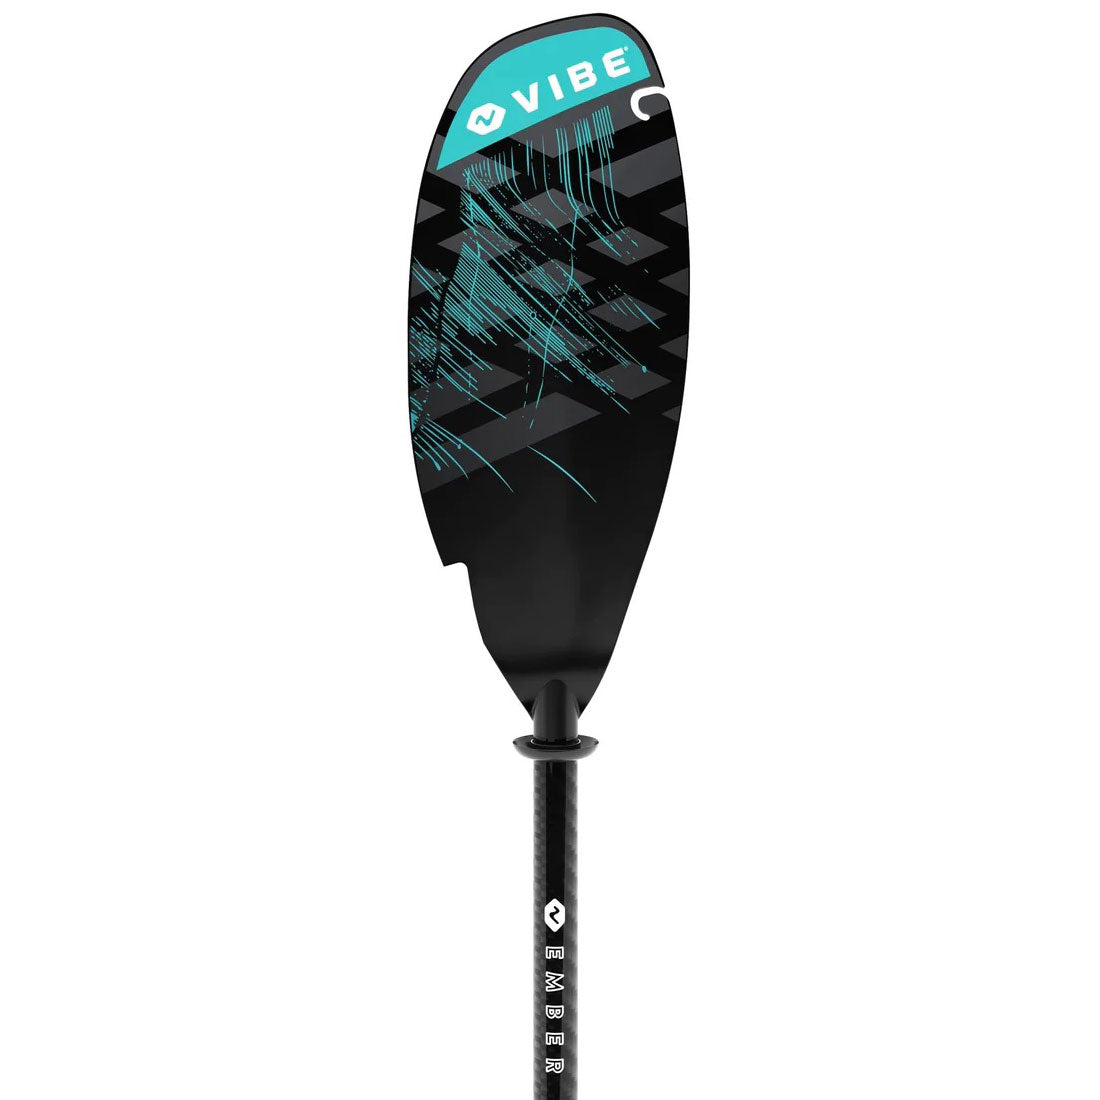 Vibe Carbon Ember paddle in Caribbean blue showing the detailing and various cutouts